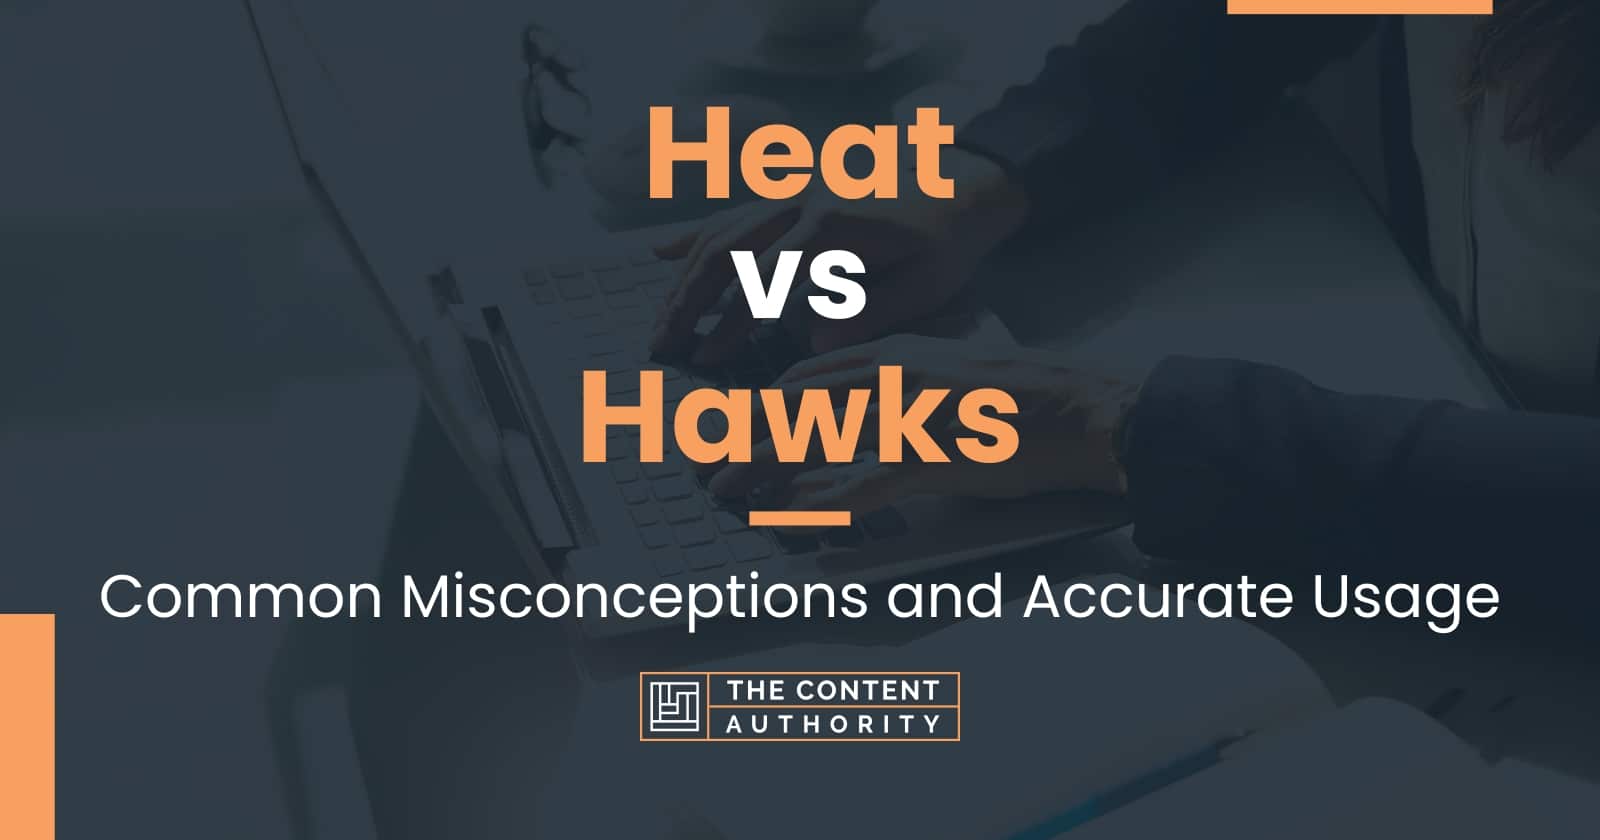 Heat vs Hawks Common Misconceptions and Accurate Usage